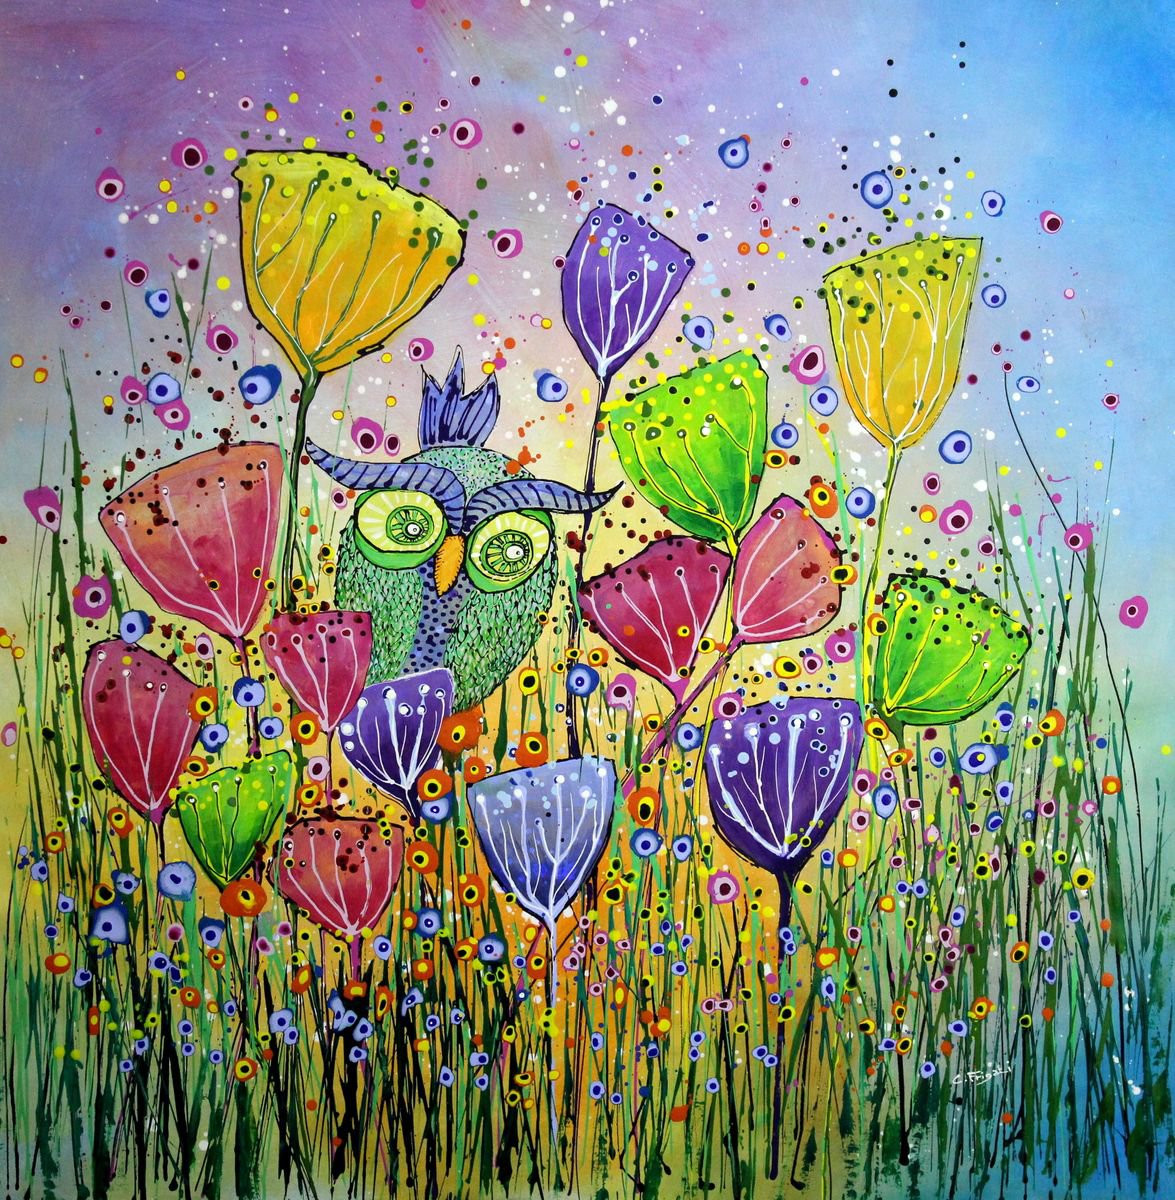 Young Folks - A Friendly Surprise #2 - Large original abstract floral painting by Cecilia Frigati